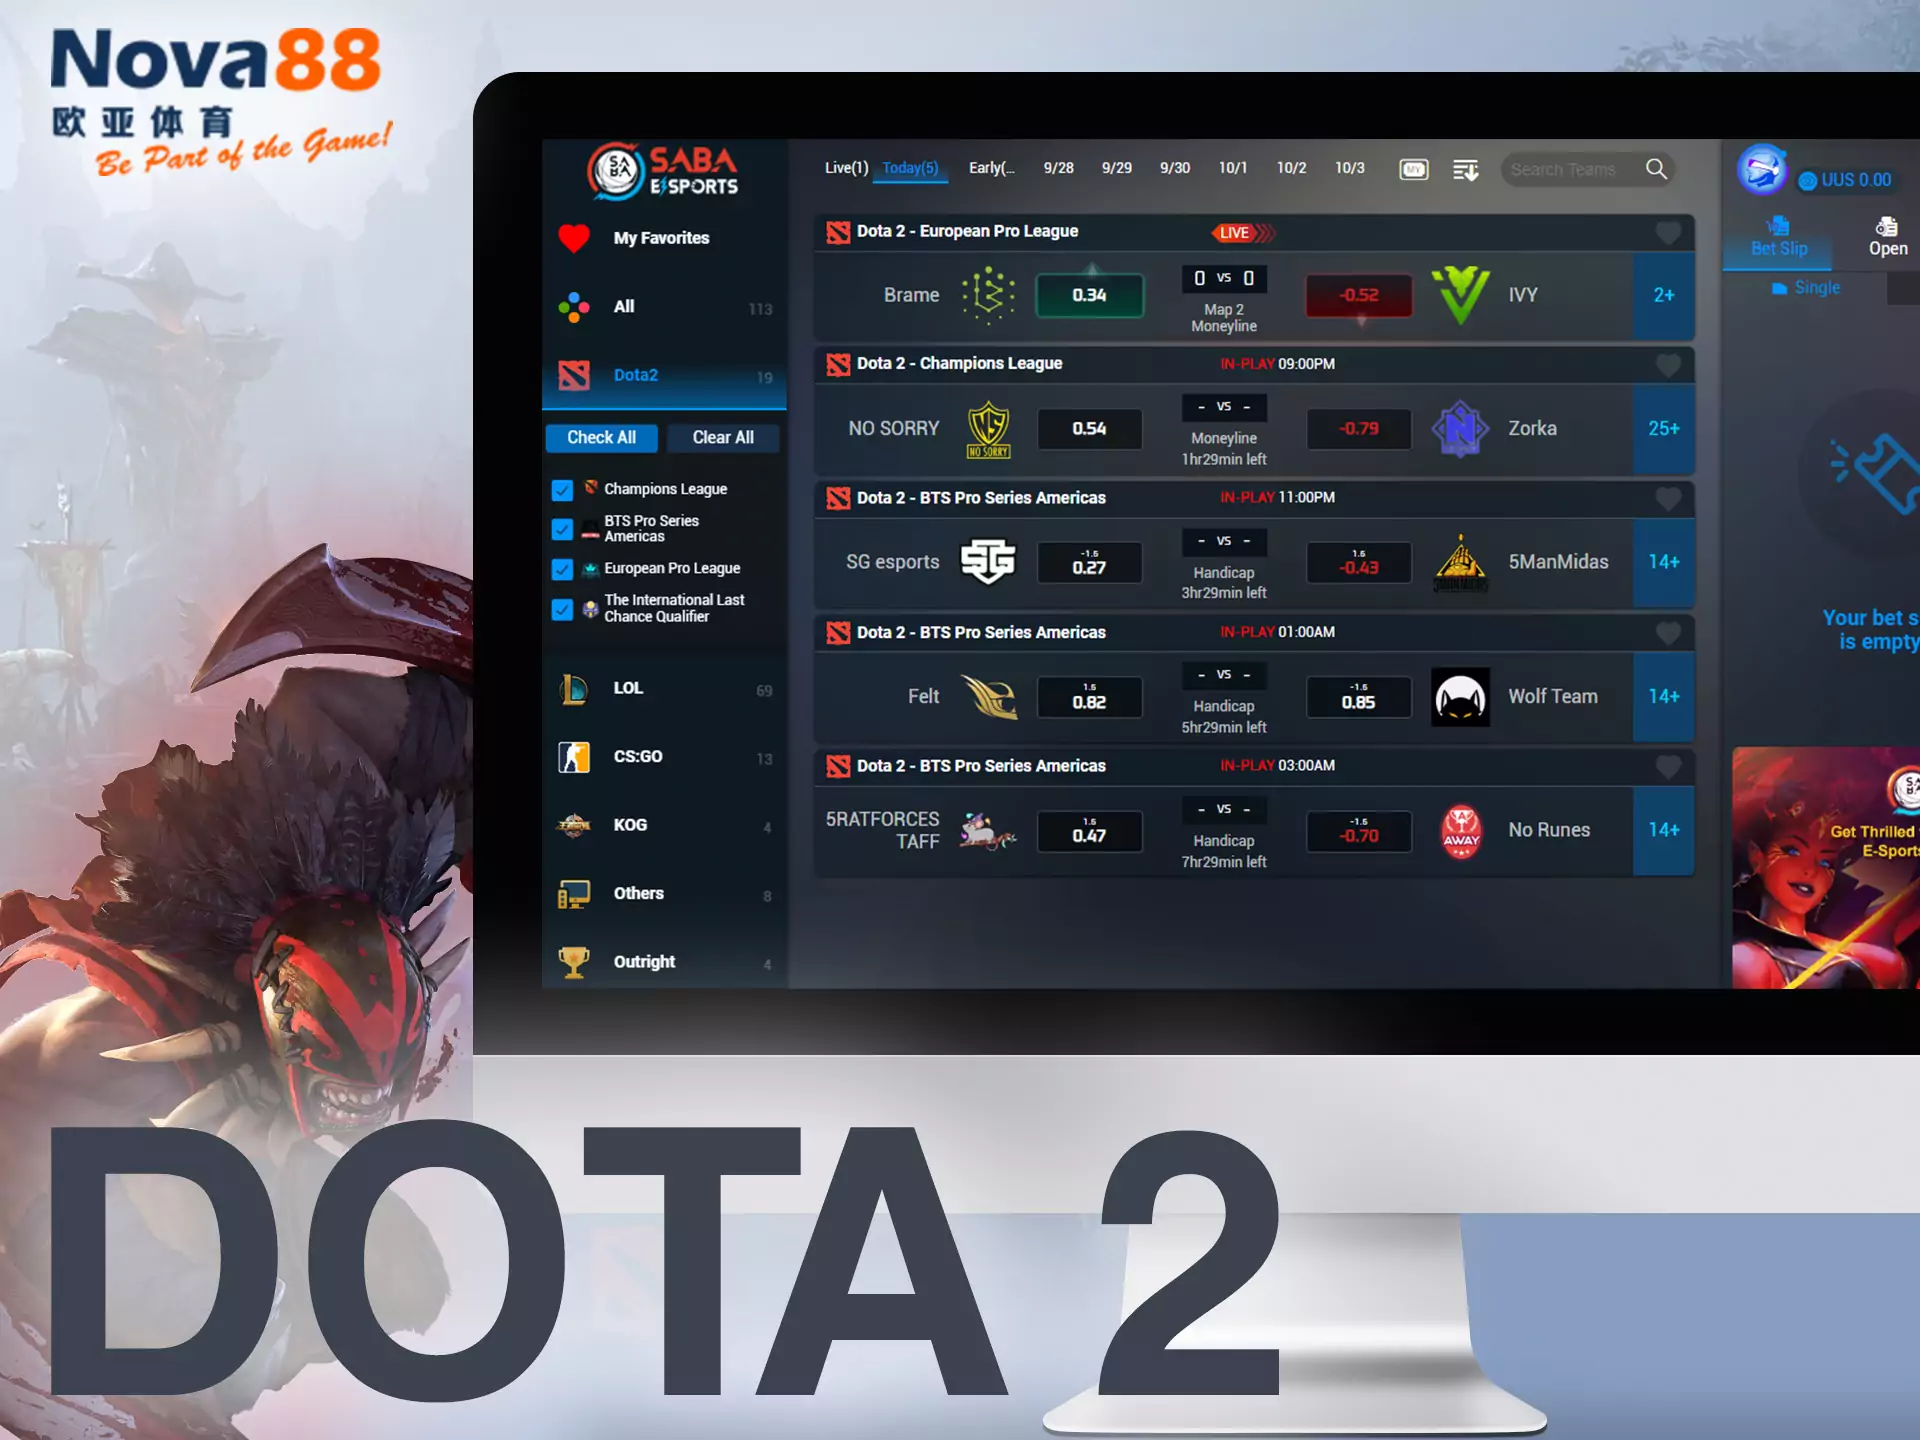 In the Nova88 sportsbook, you find Dota2 championships available for placing bets.